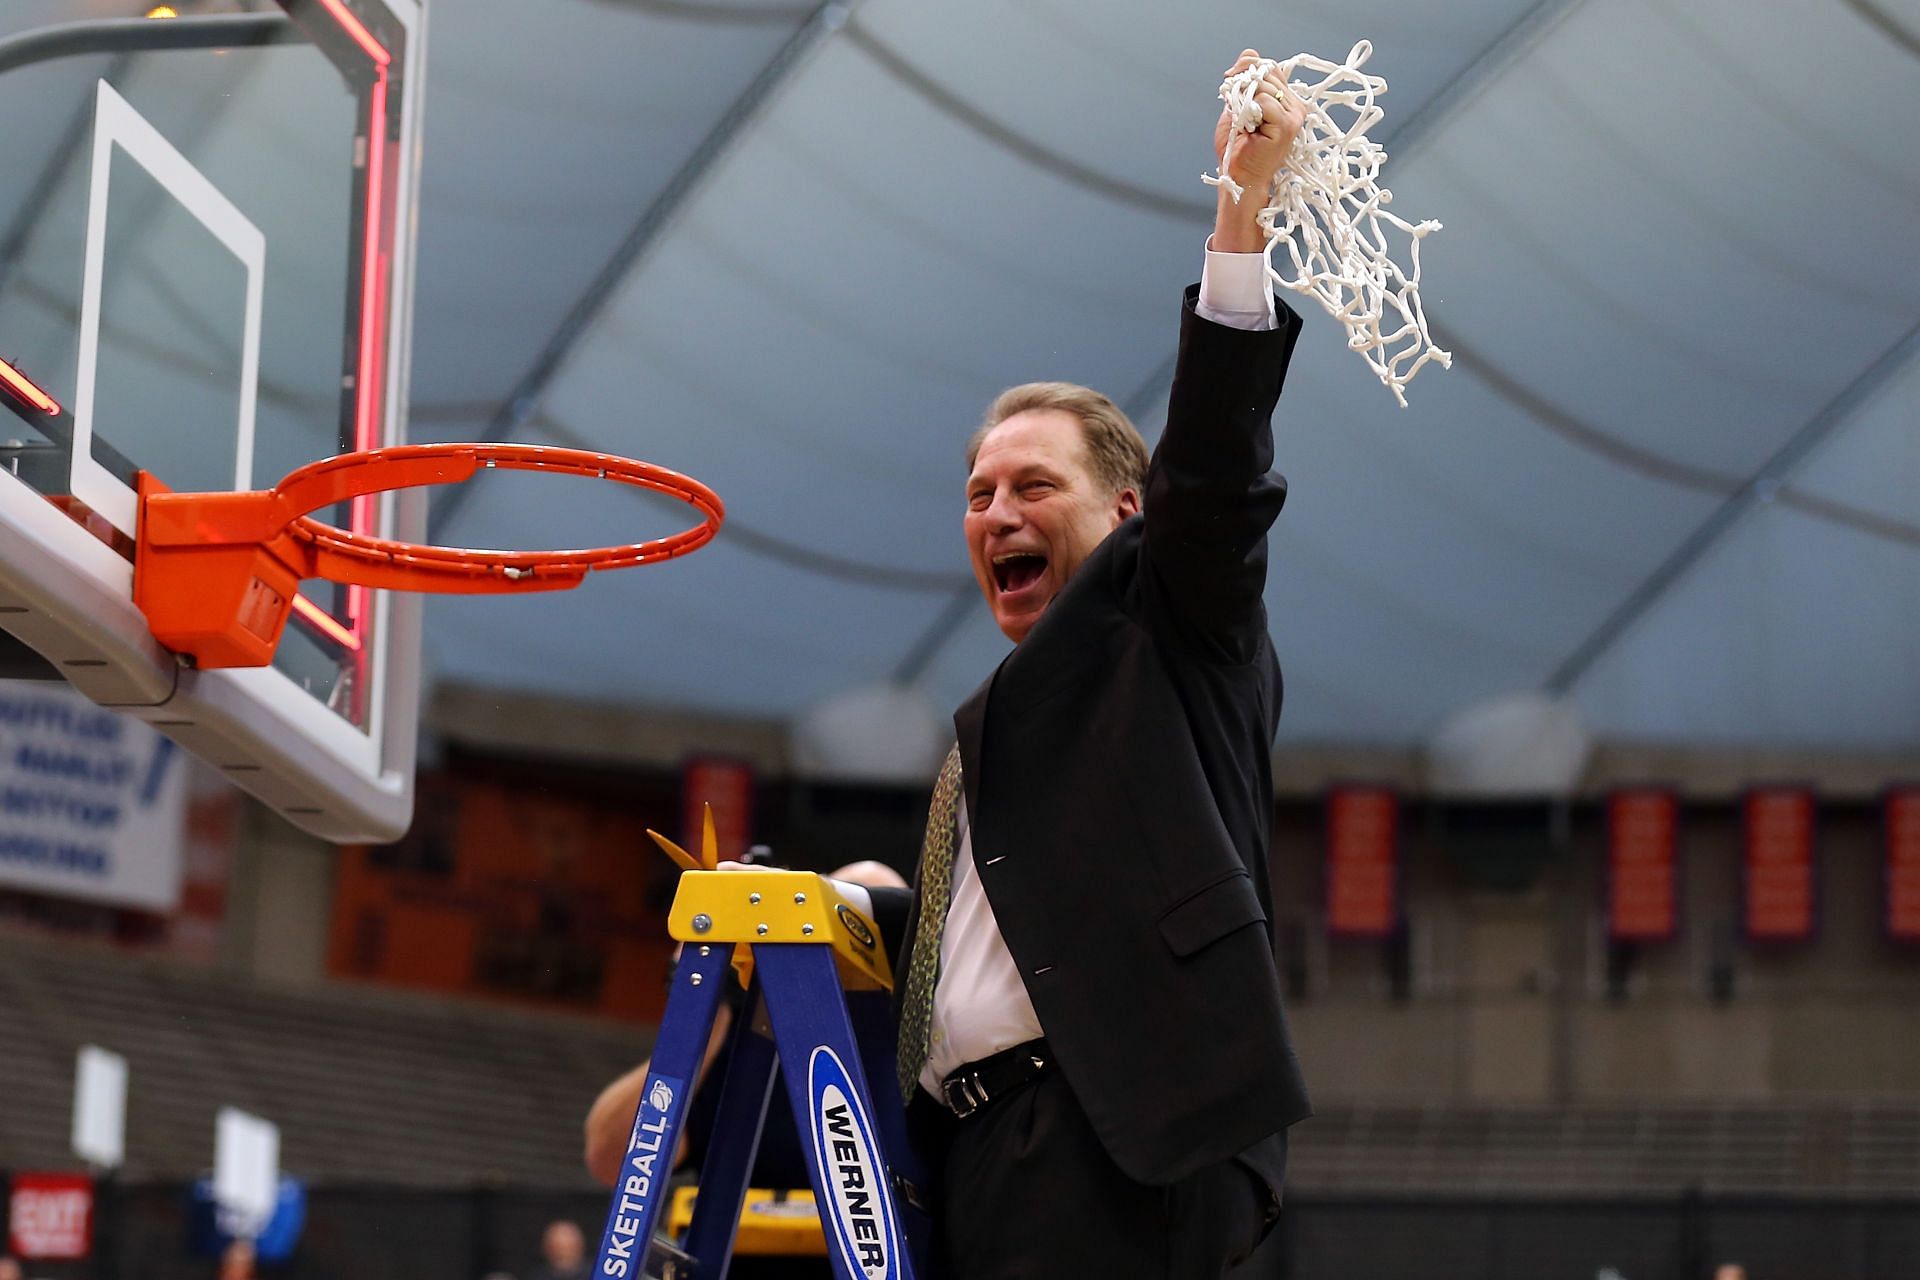 Tom Izzo led the Spartans to three straight Final Four appearances.